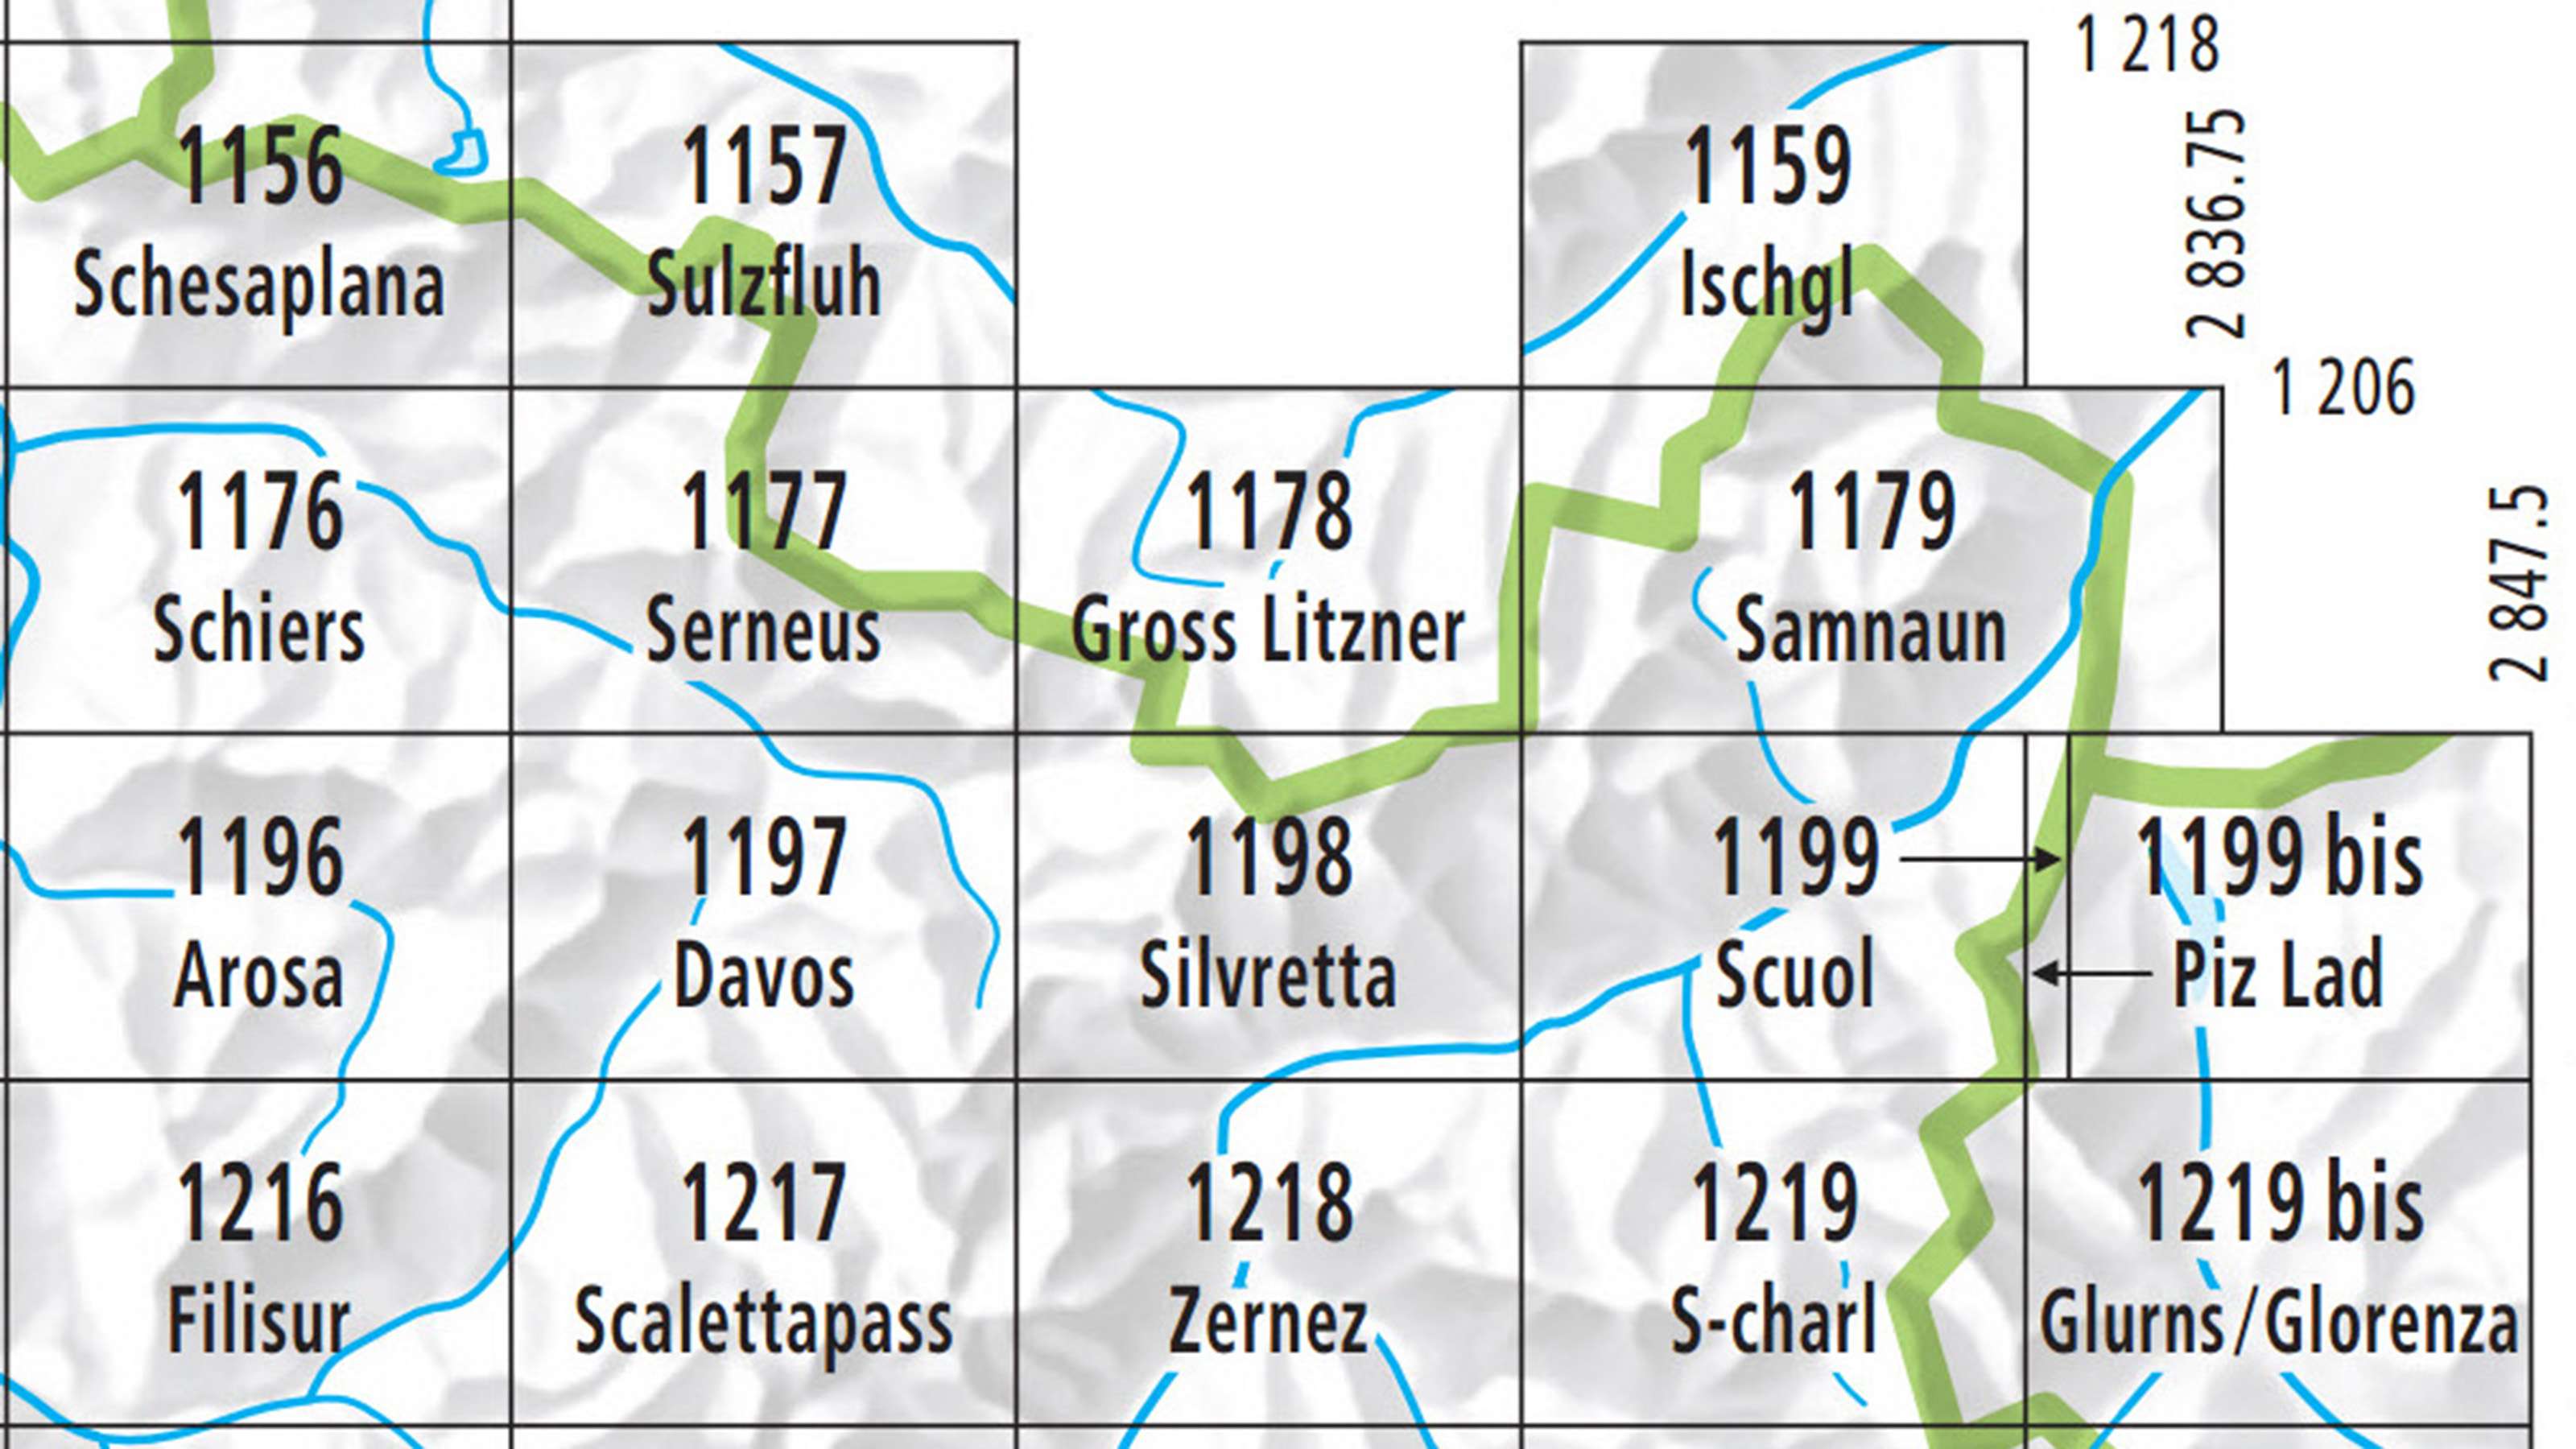 Extract from the sheet division of the national map, Graubünden region.